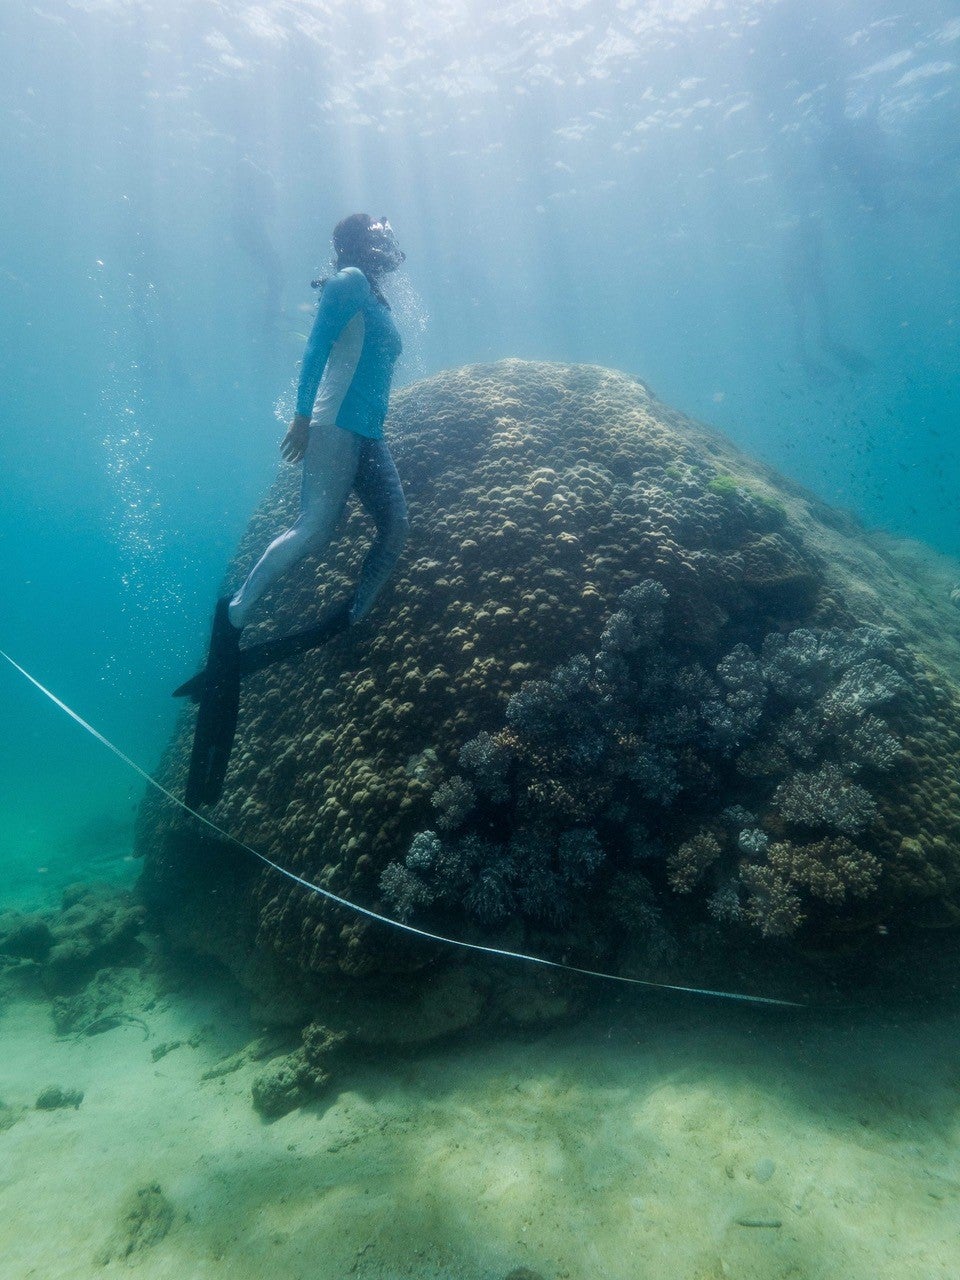 A tape measure strung around the giant coral. (Image: Woody Spark)